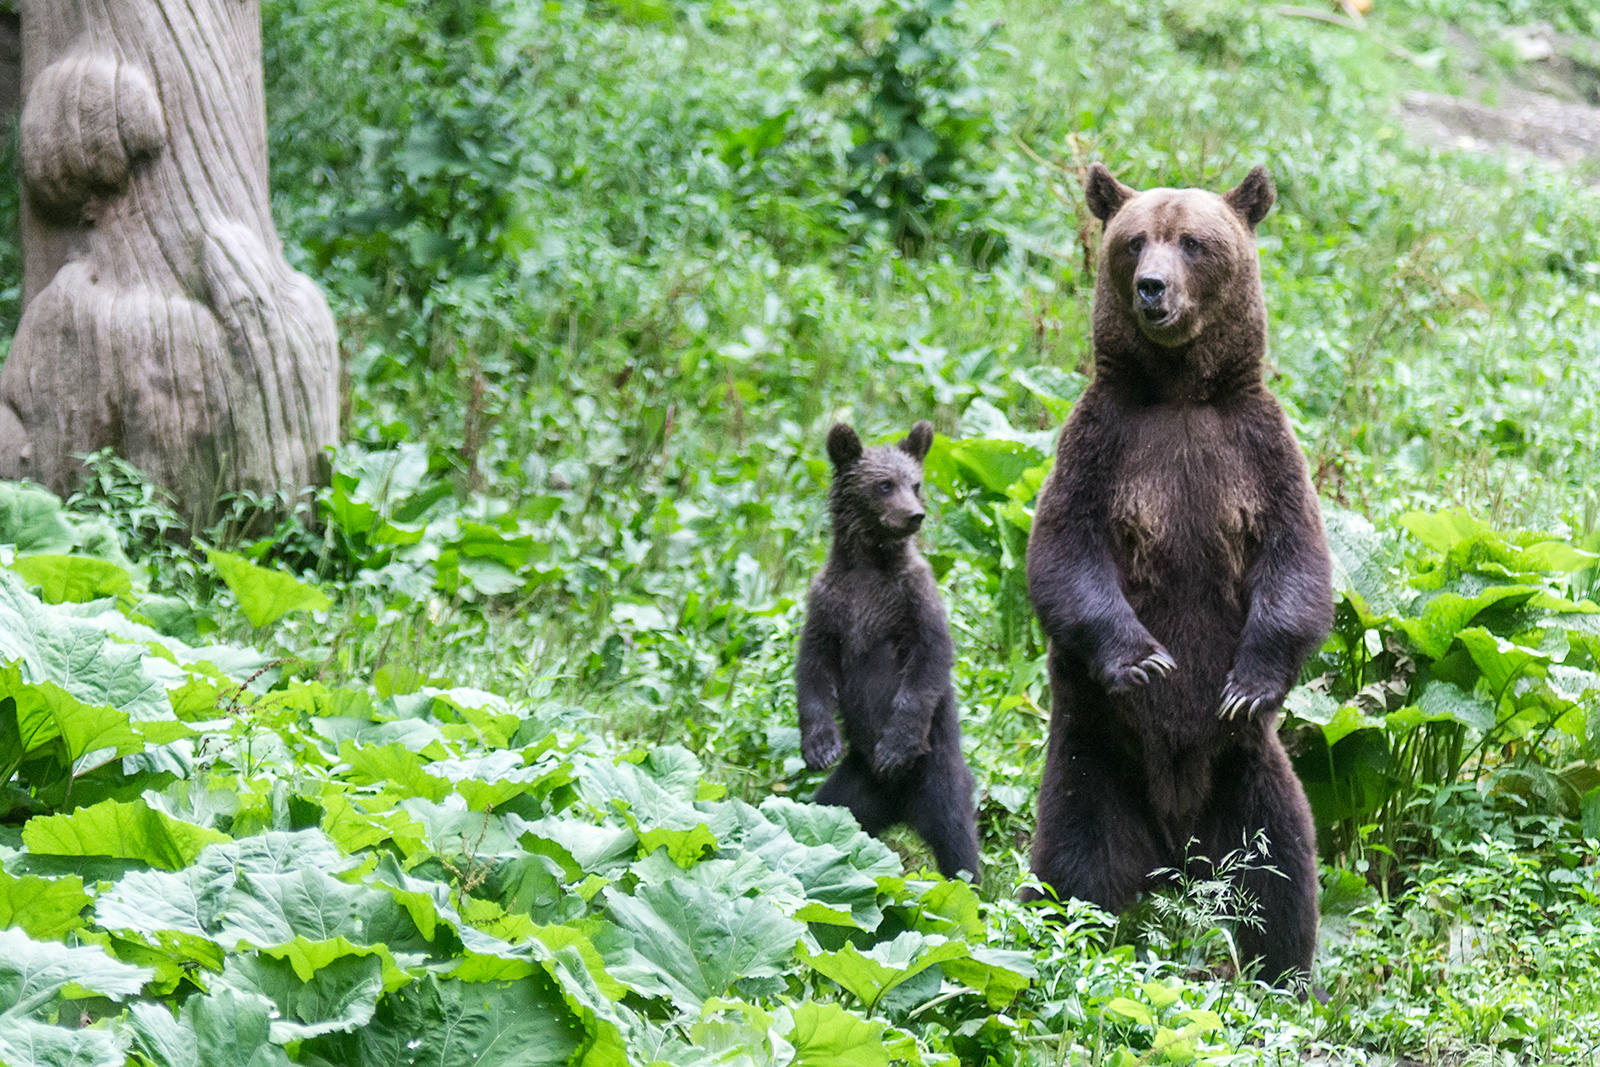 Even during feeding the bears were listening for any sound of possible danger